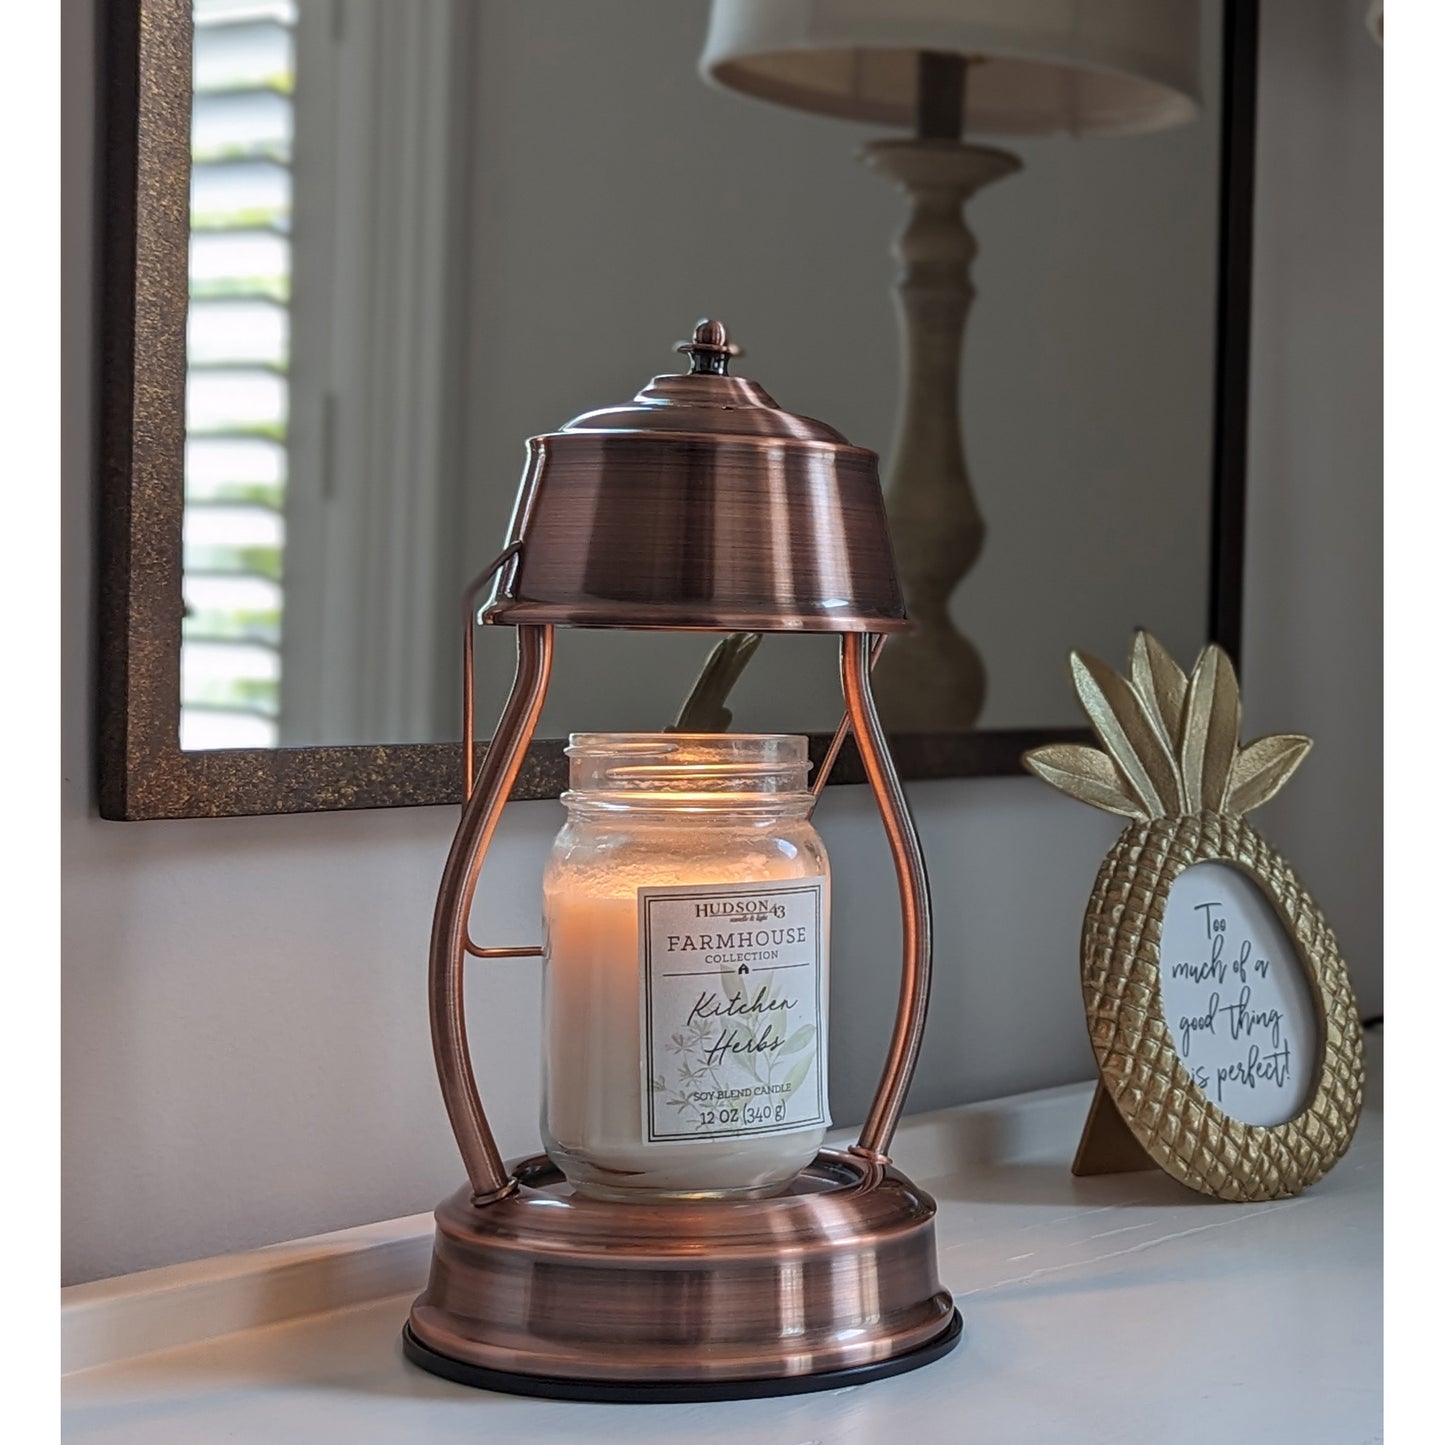 age, lit copper candle warmer with larger mason jar scented candle placed on an entry hall table.